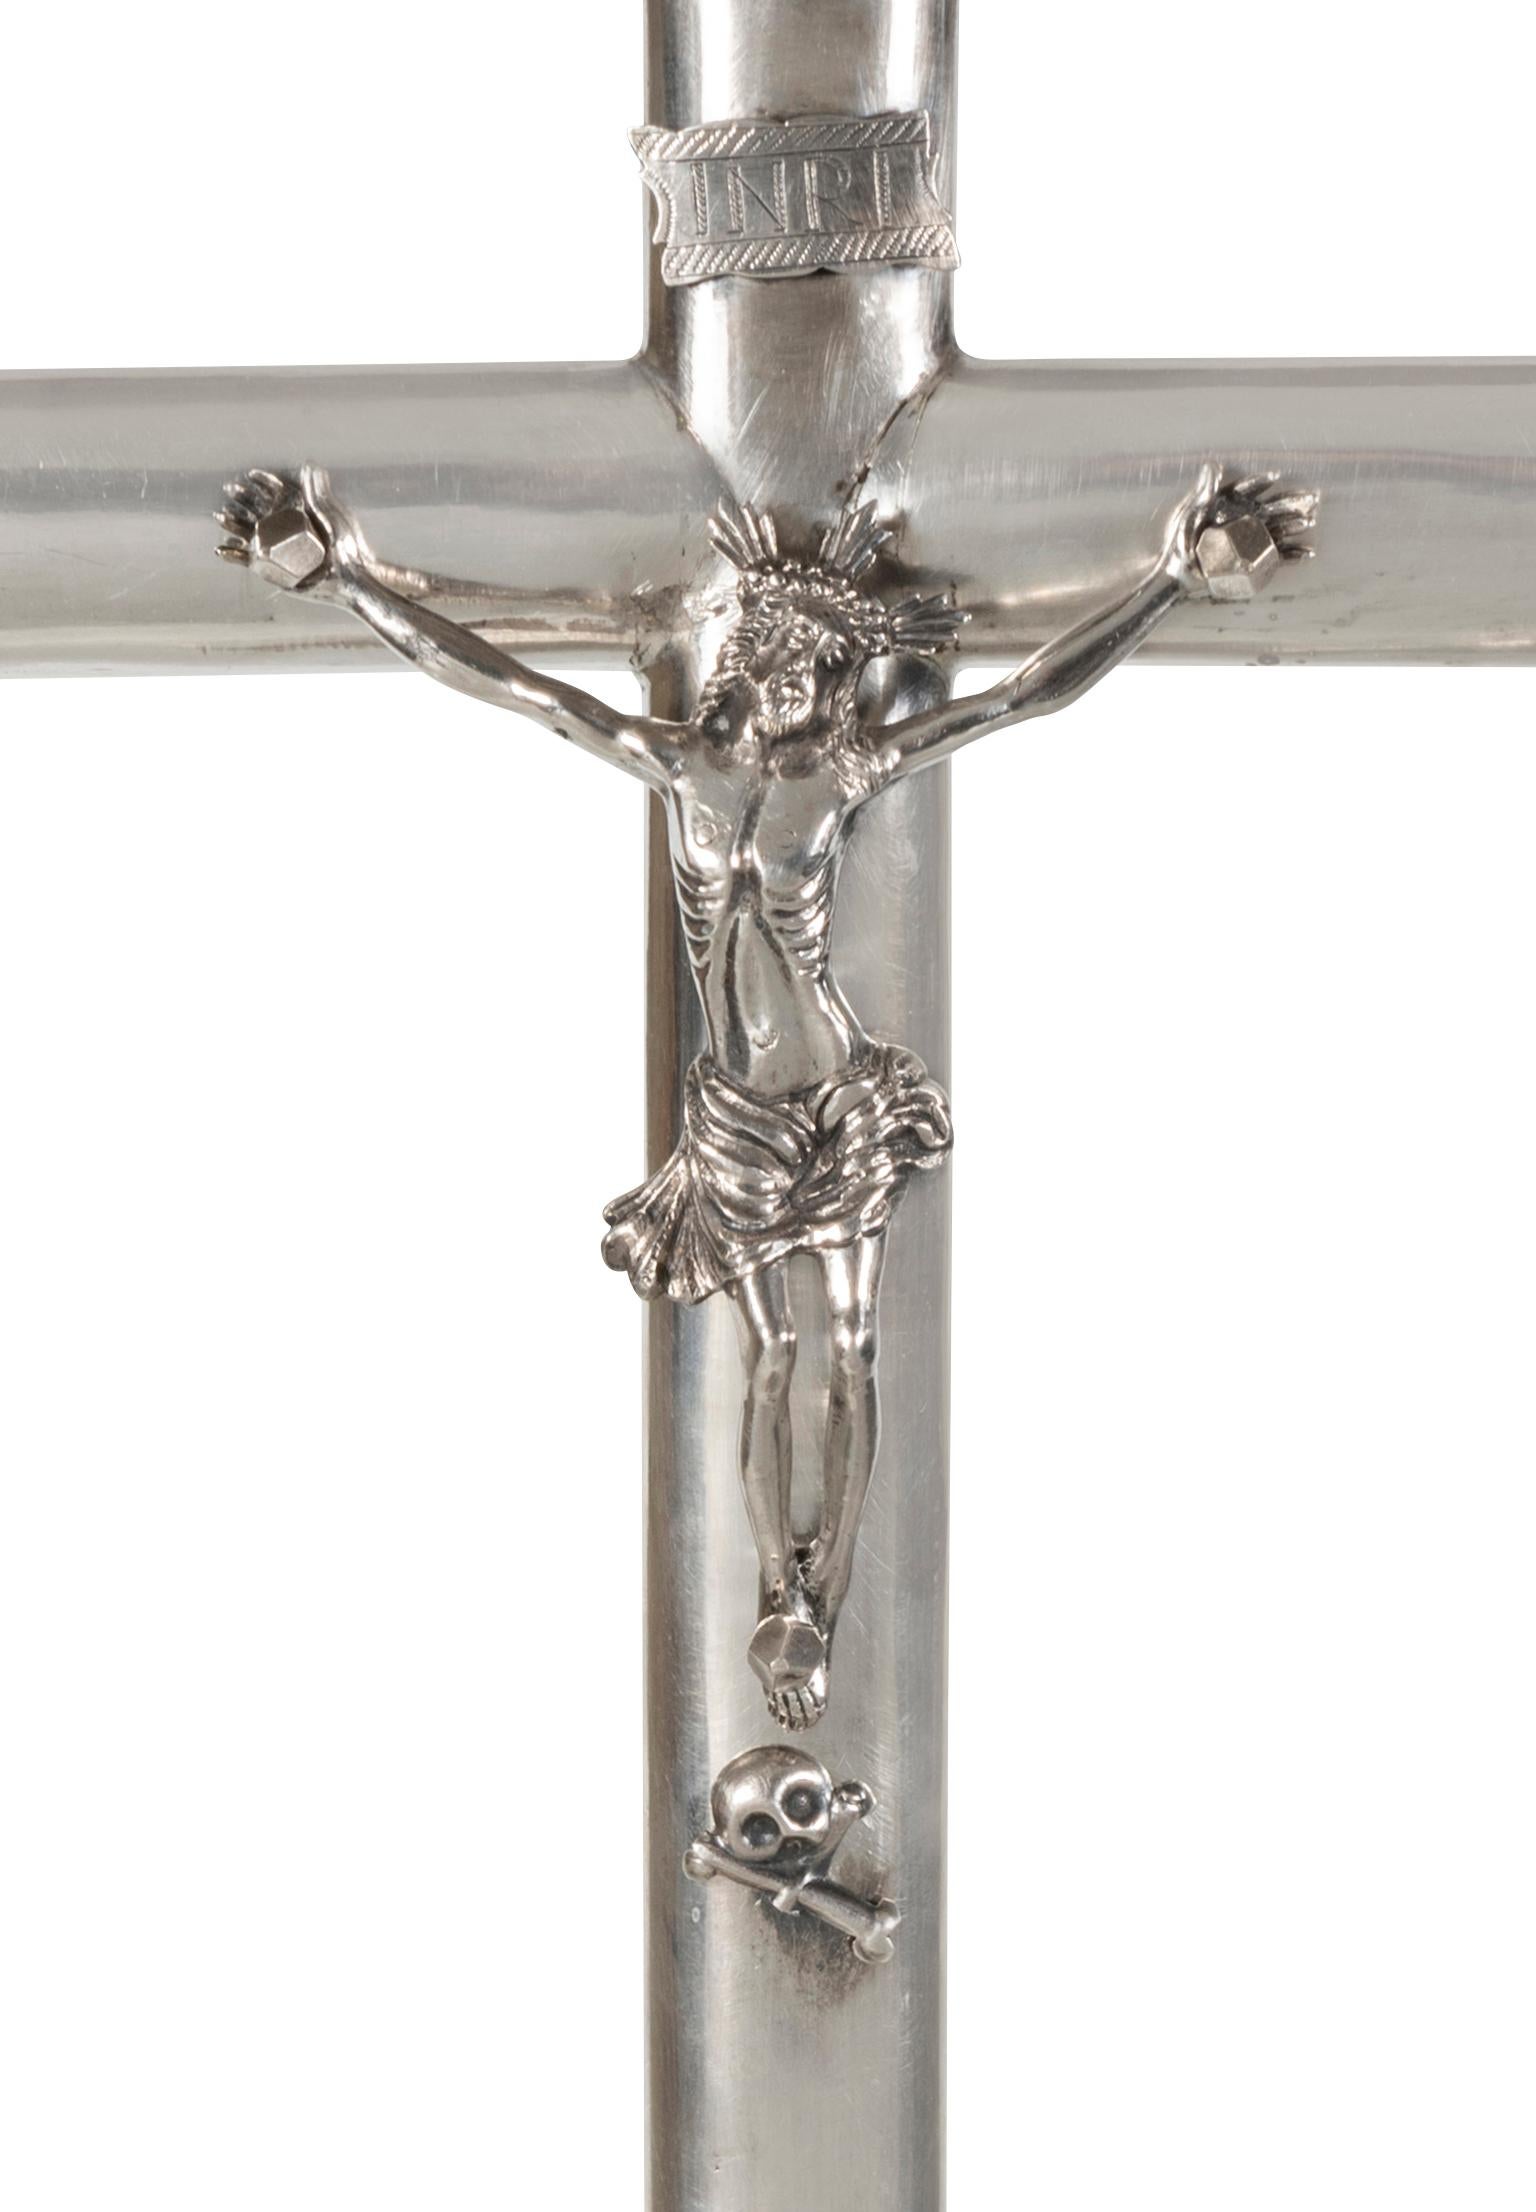 A 19th Century Spanish Silver-Plated Alter Crucifix In Good Condition For Sale In Armadale, Victoria